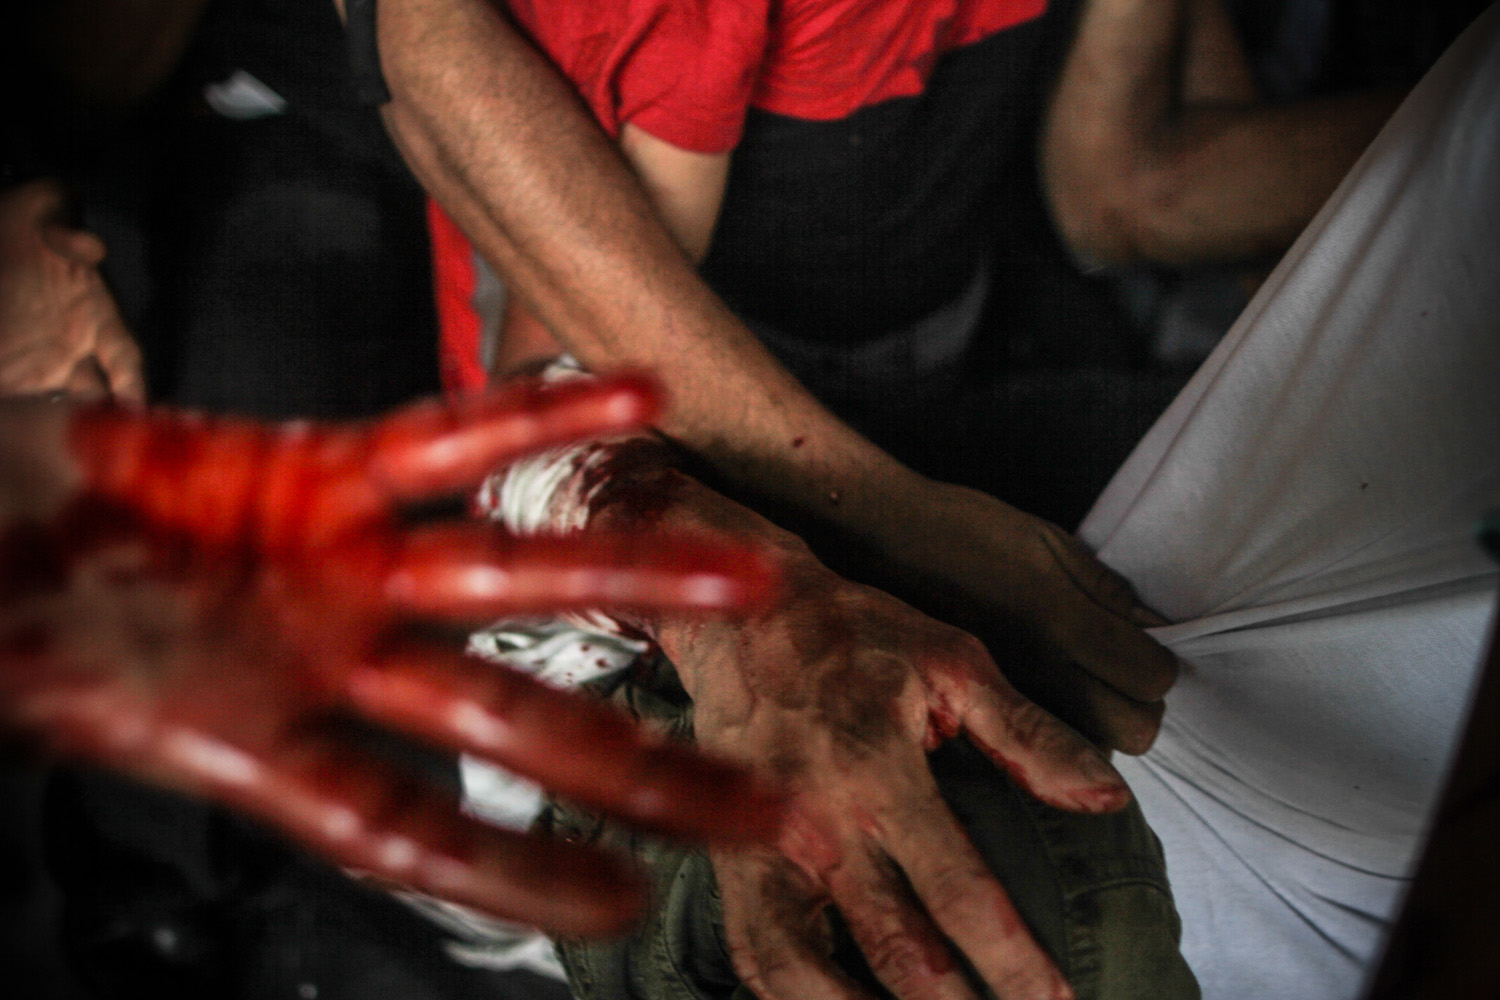 Aug. 16, 2013. Bloodied hands are seen at Ramses square, where violent clashes broke out on the Day of Rage, the first Friday after the Rabaa Adaweya massacre.